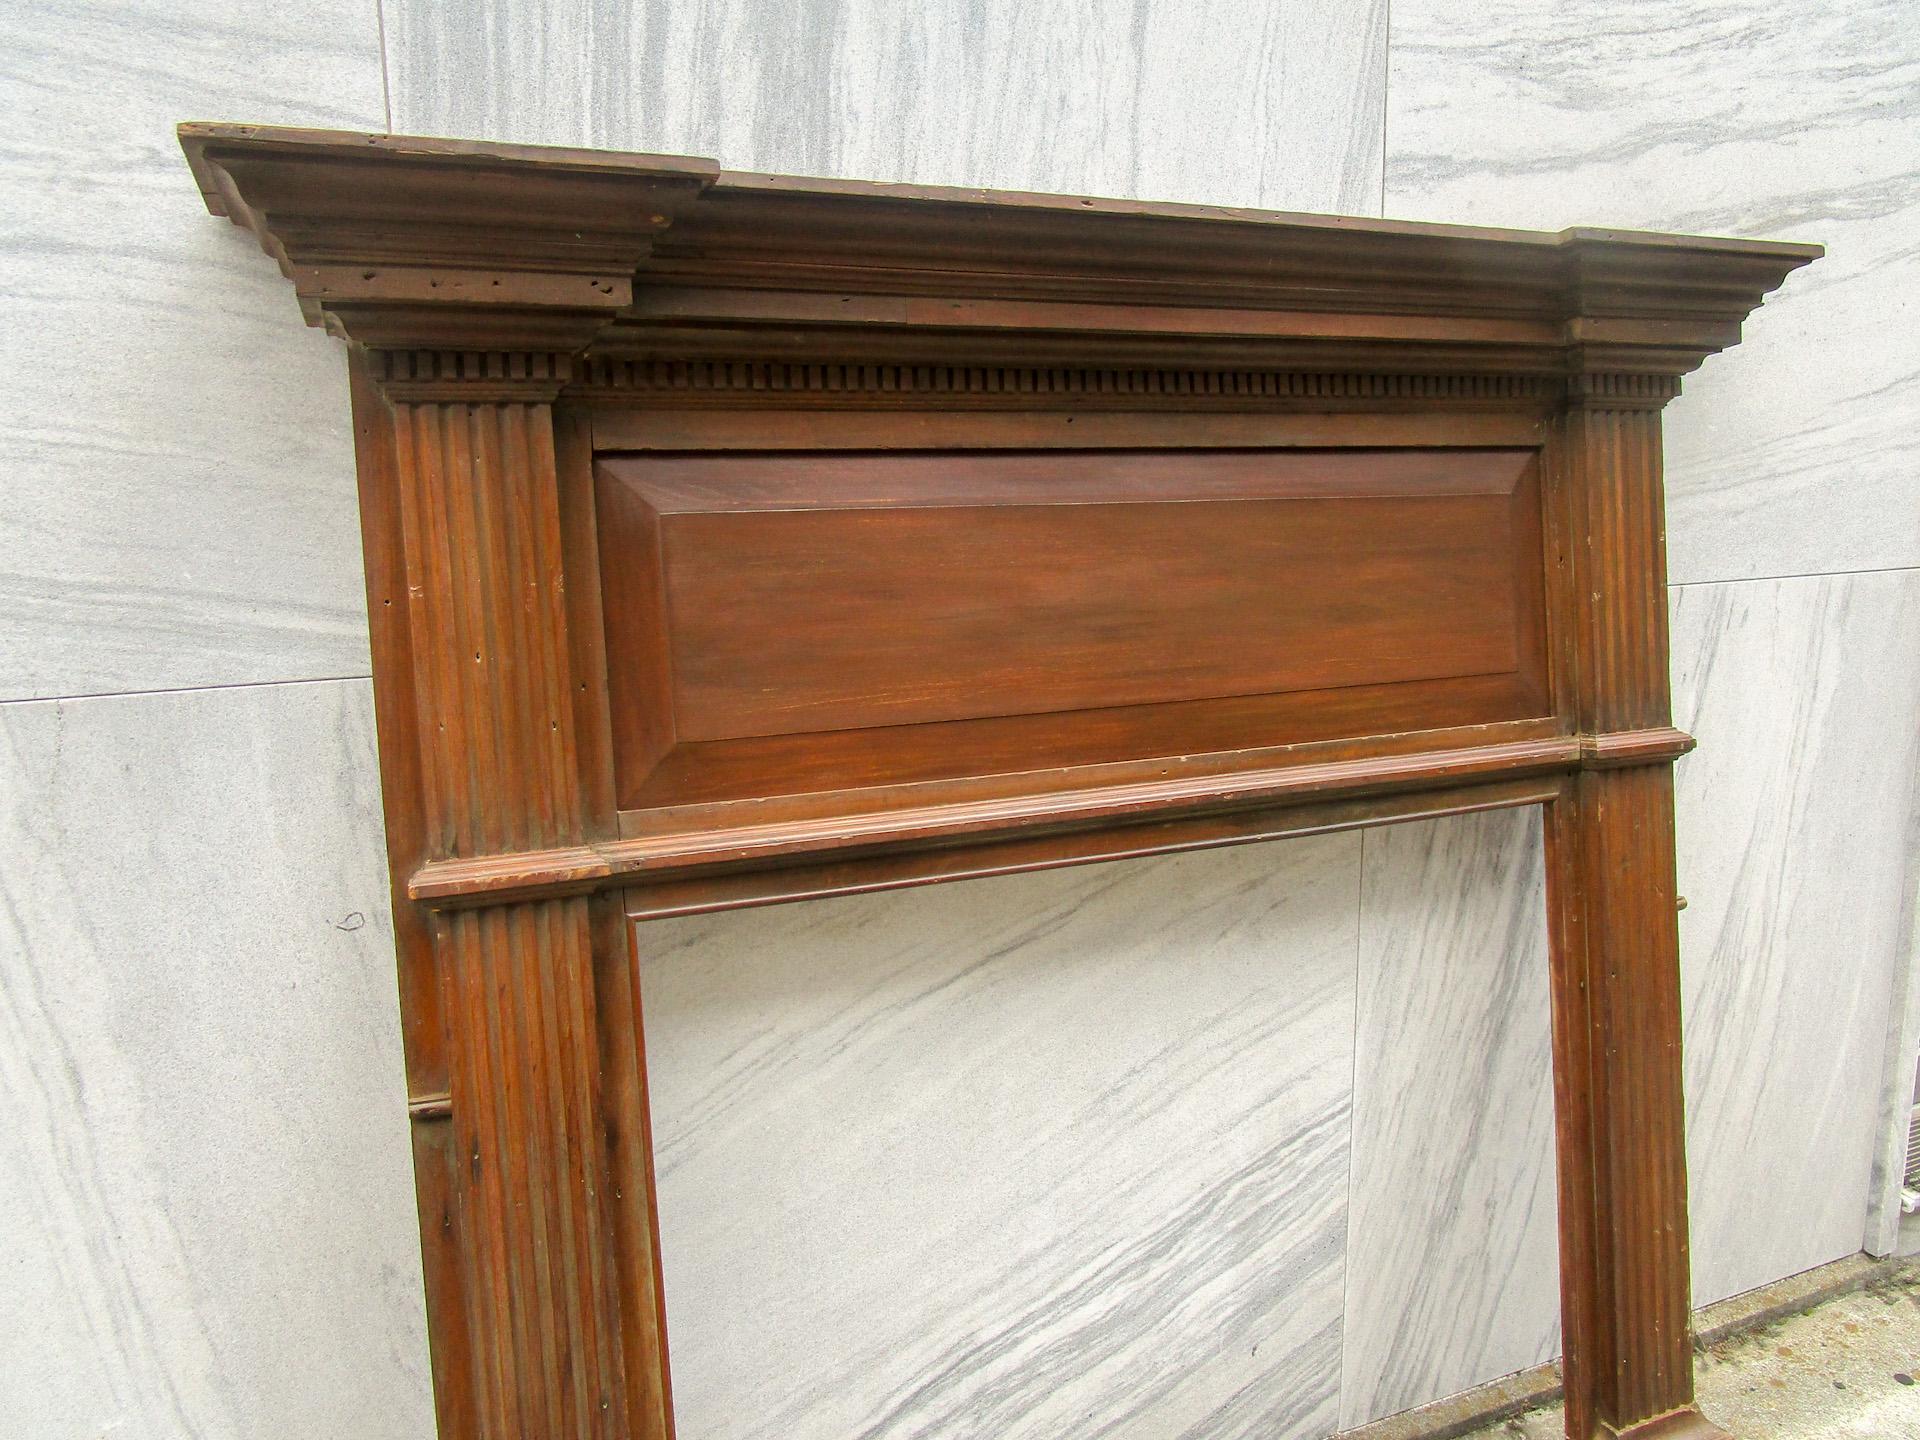 Late 18th Century 18th c Large Federal Style American Wooden Fireplace Mantel For Sale